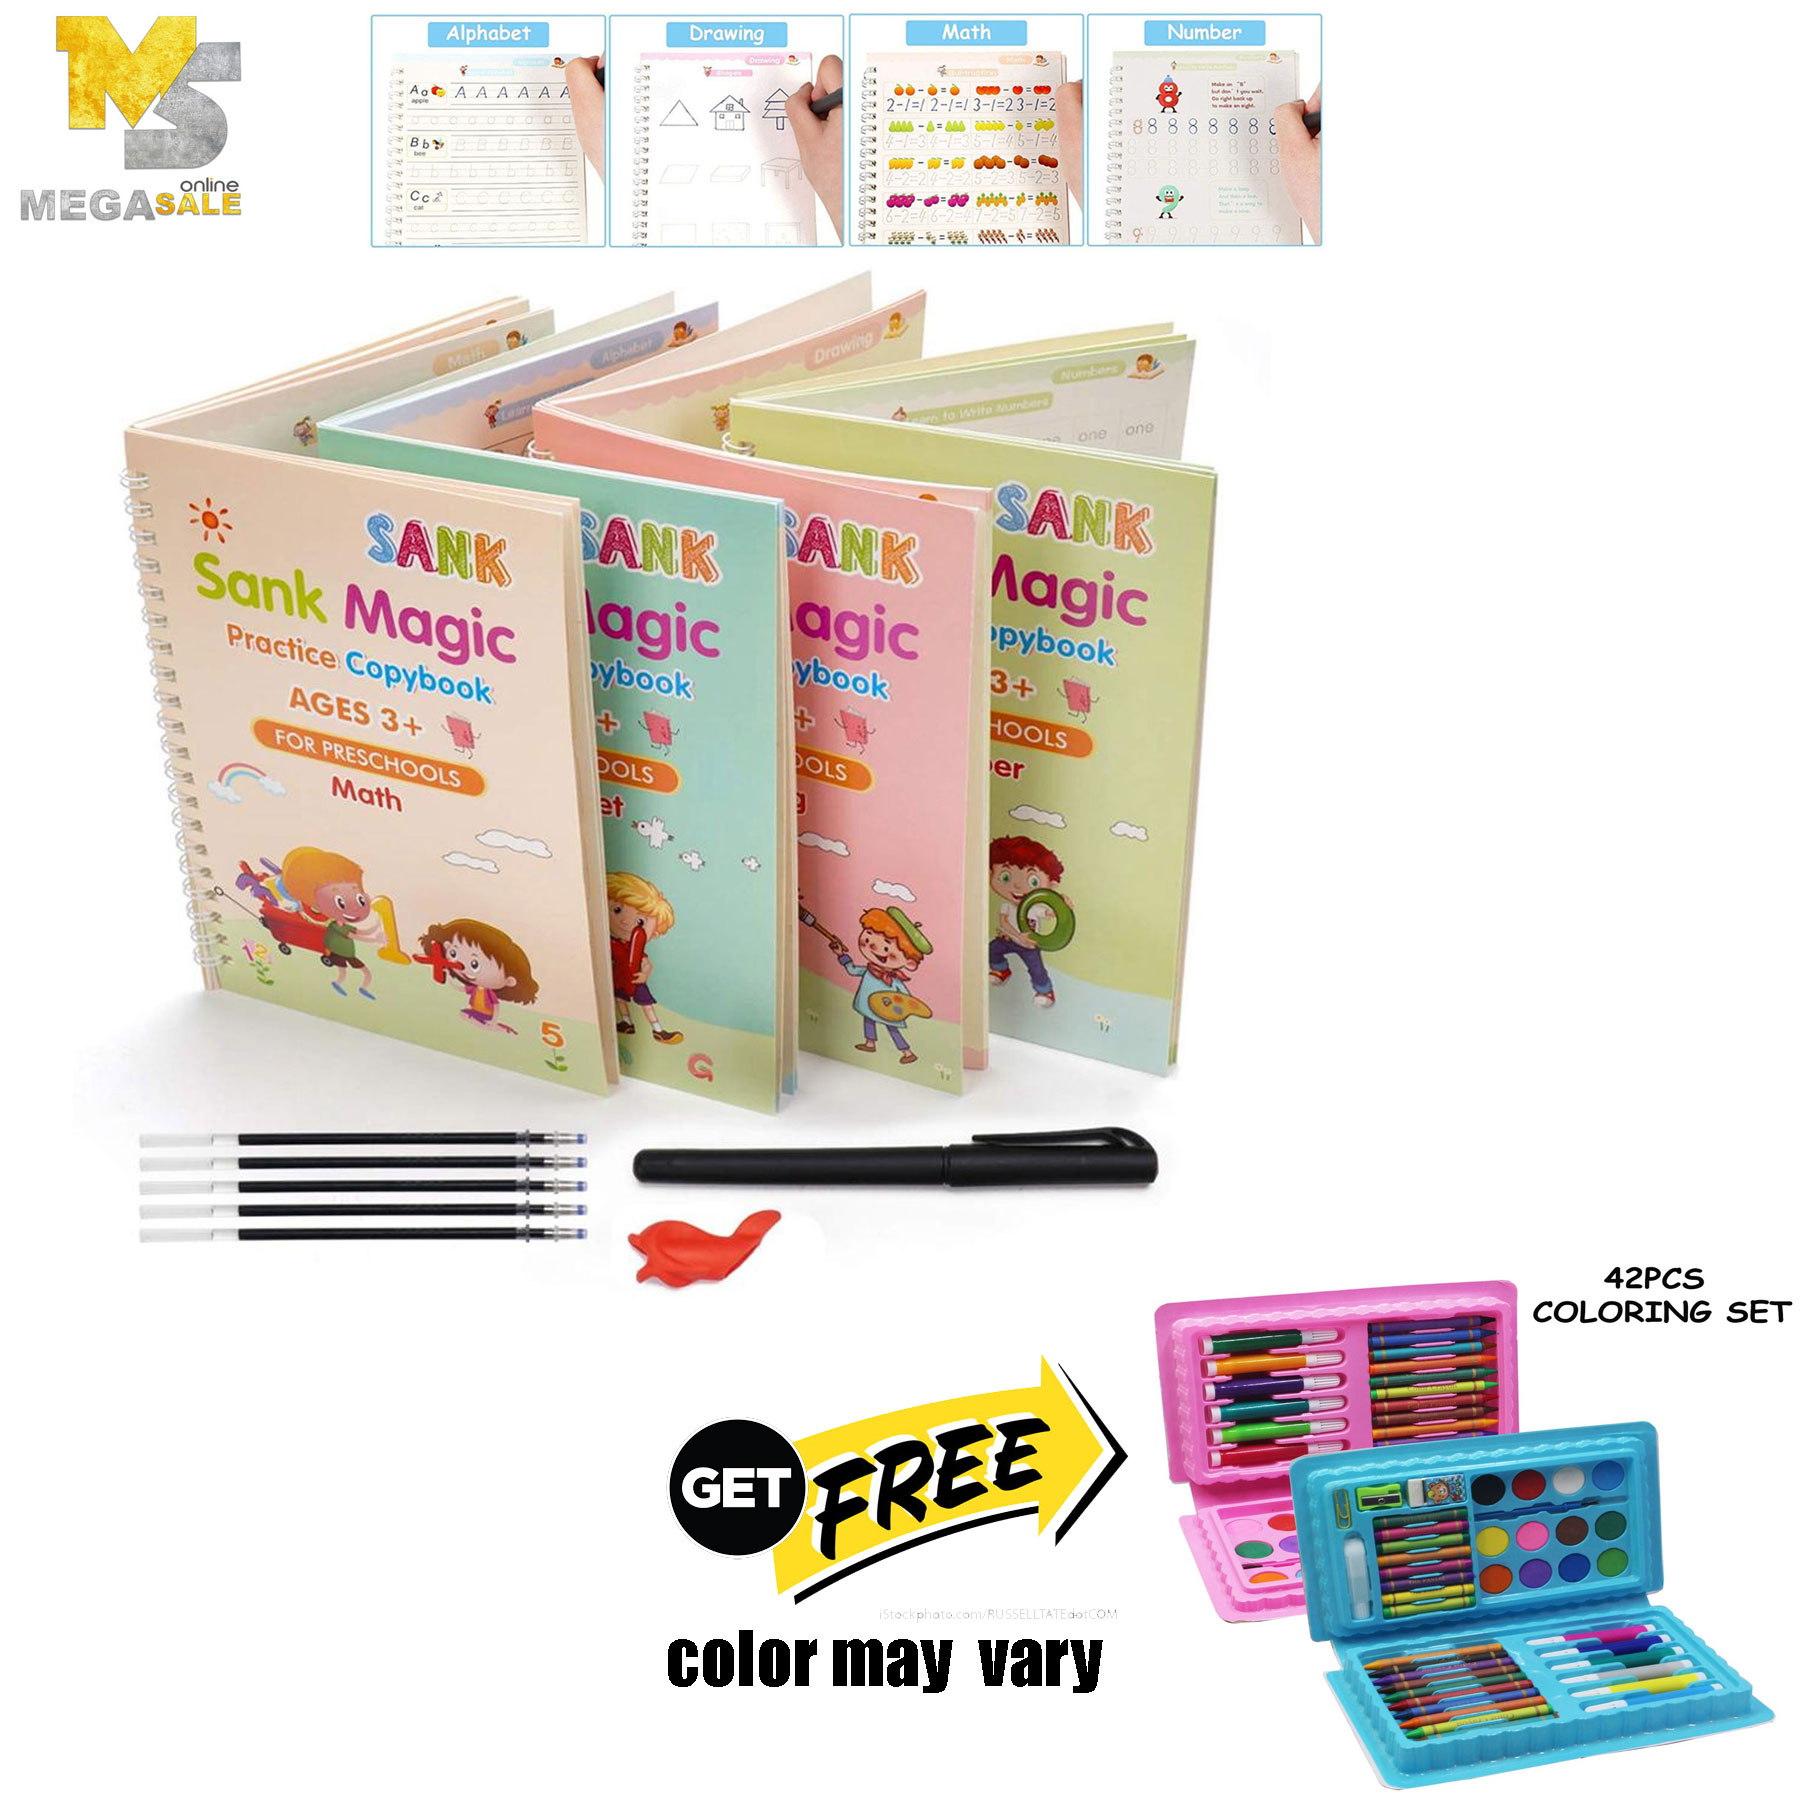 Kids Magic Calligraphy Paper Pen Set,Reusable Practice Copybook with Grid for Beginners Chilren Preschools Learning Letters Numbers,Math and Drawing,4 Different Books with 1 Marker and Refills 